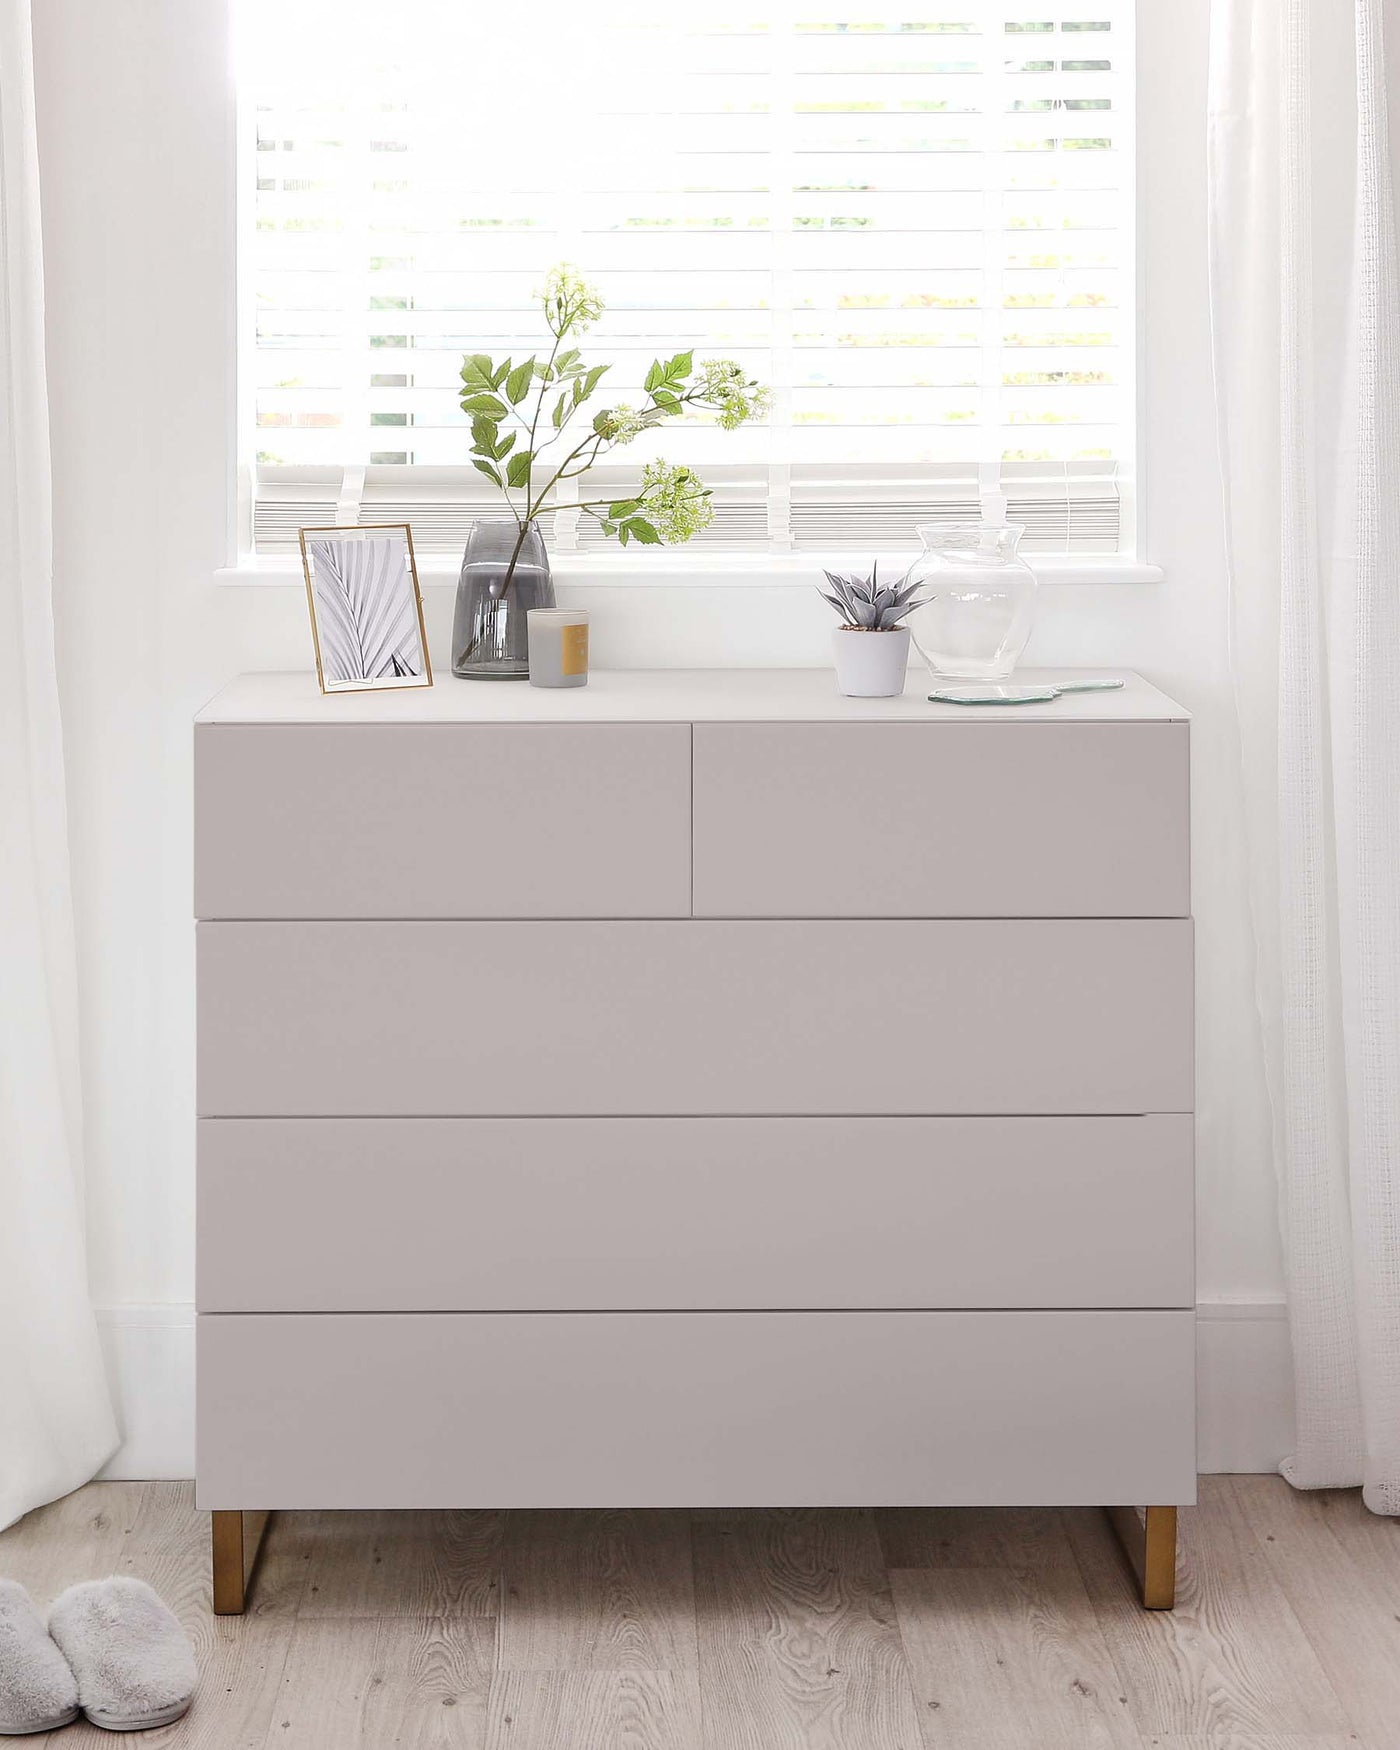 Modern light grey four-drawer dresser with angular lines, standing on four tapered wooden legs. The dresser is styled with a clear glass vase holding greenery, a small potted plant, a picture frame, and decorative items on its surface, against a backdrop of a bright window with white Venetian blinds and sheer curtains.